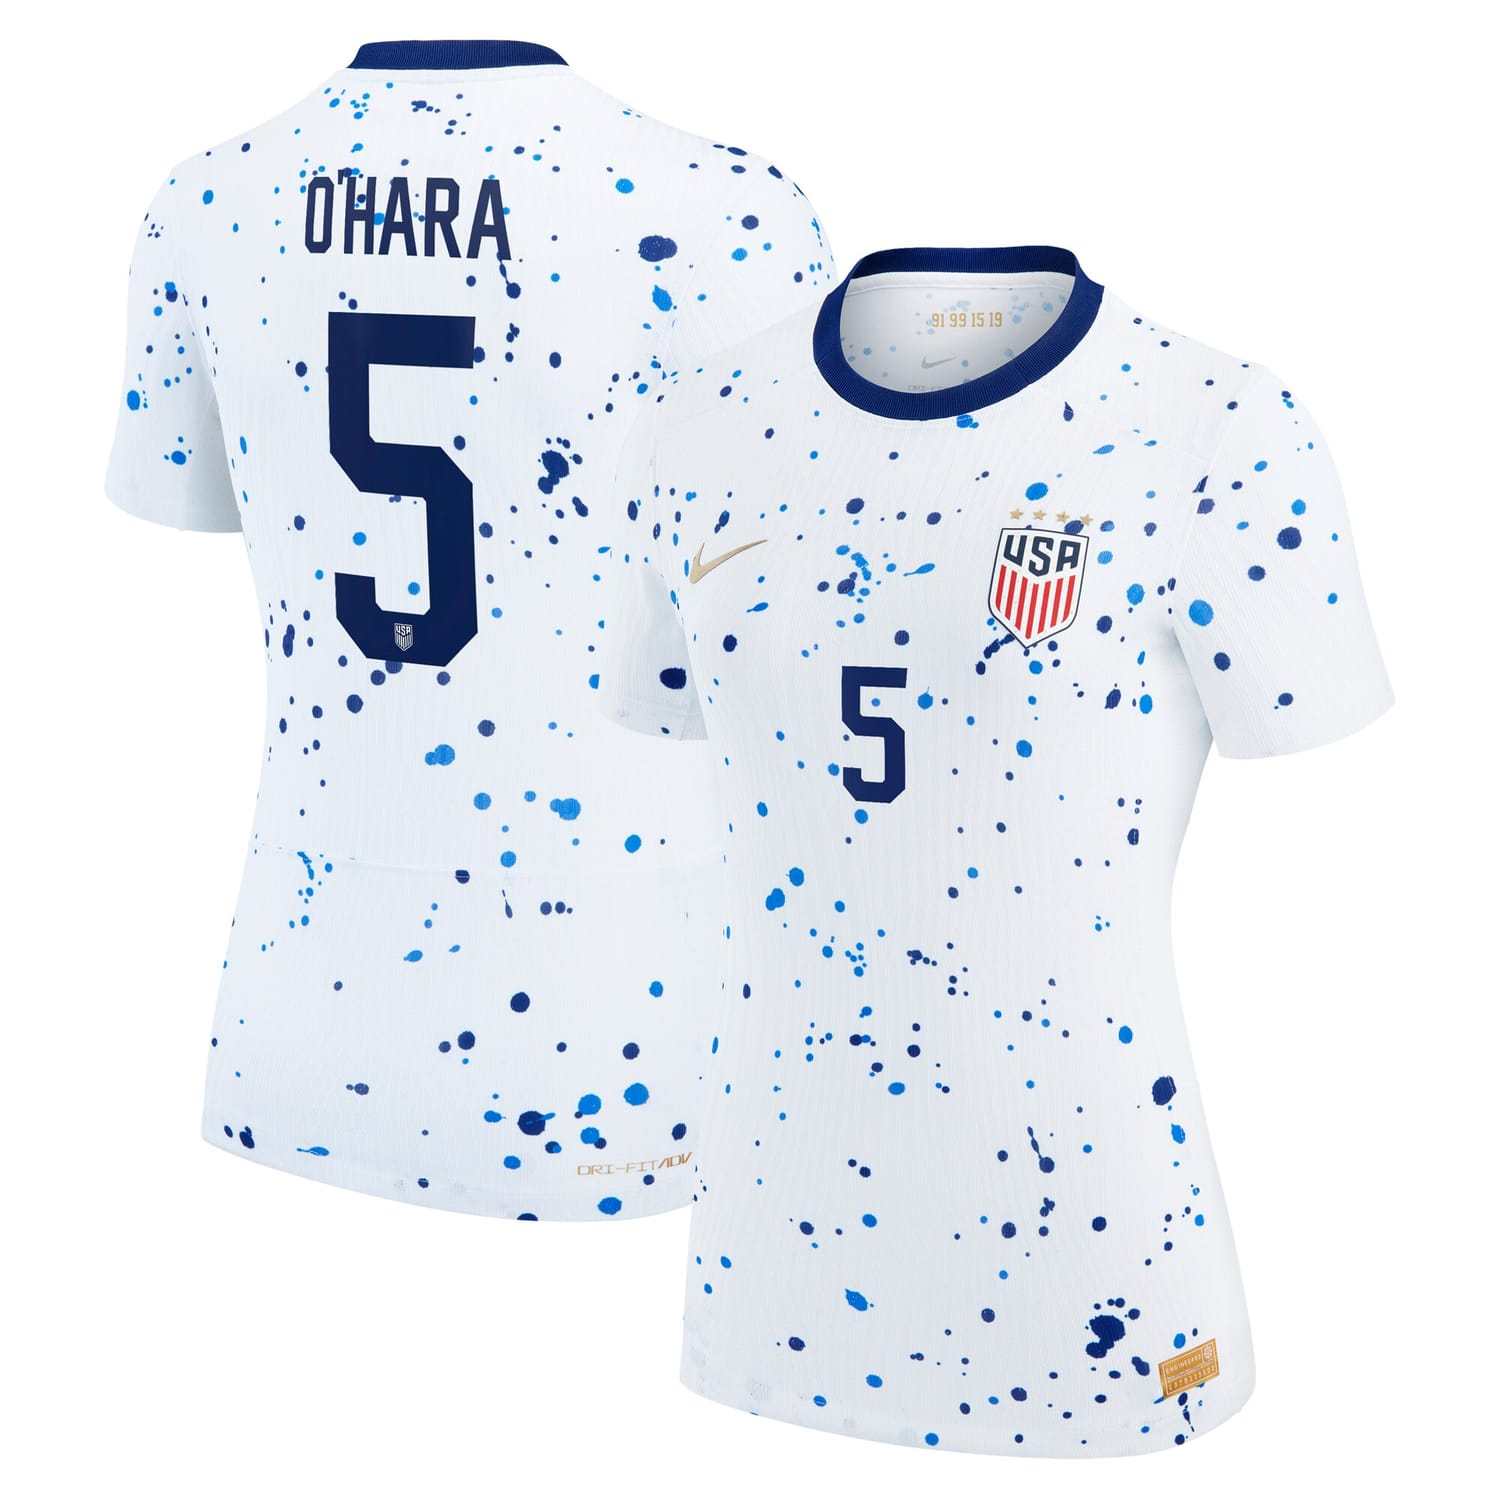 USWNT Home Authentic Jersey Shirt White 2023 player Kelley O'Hara printing for Women